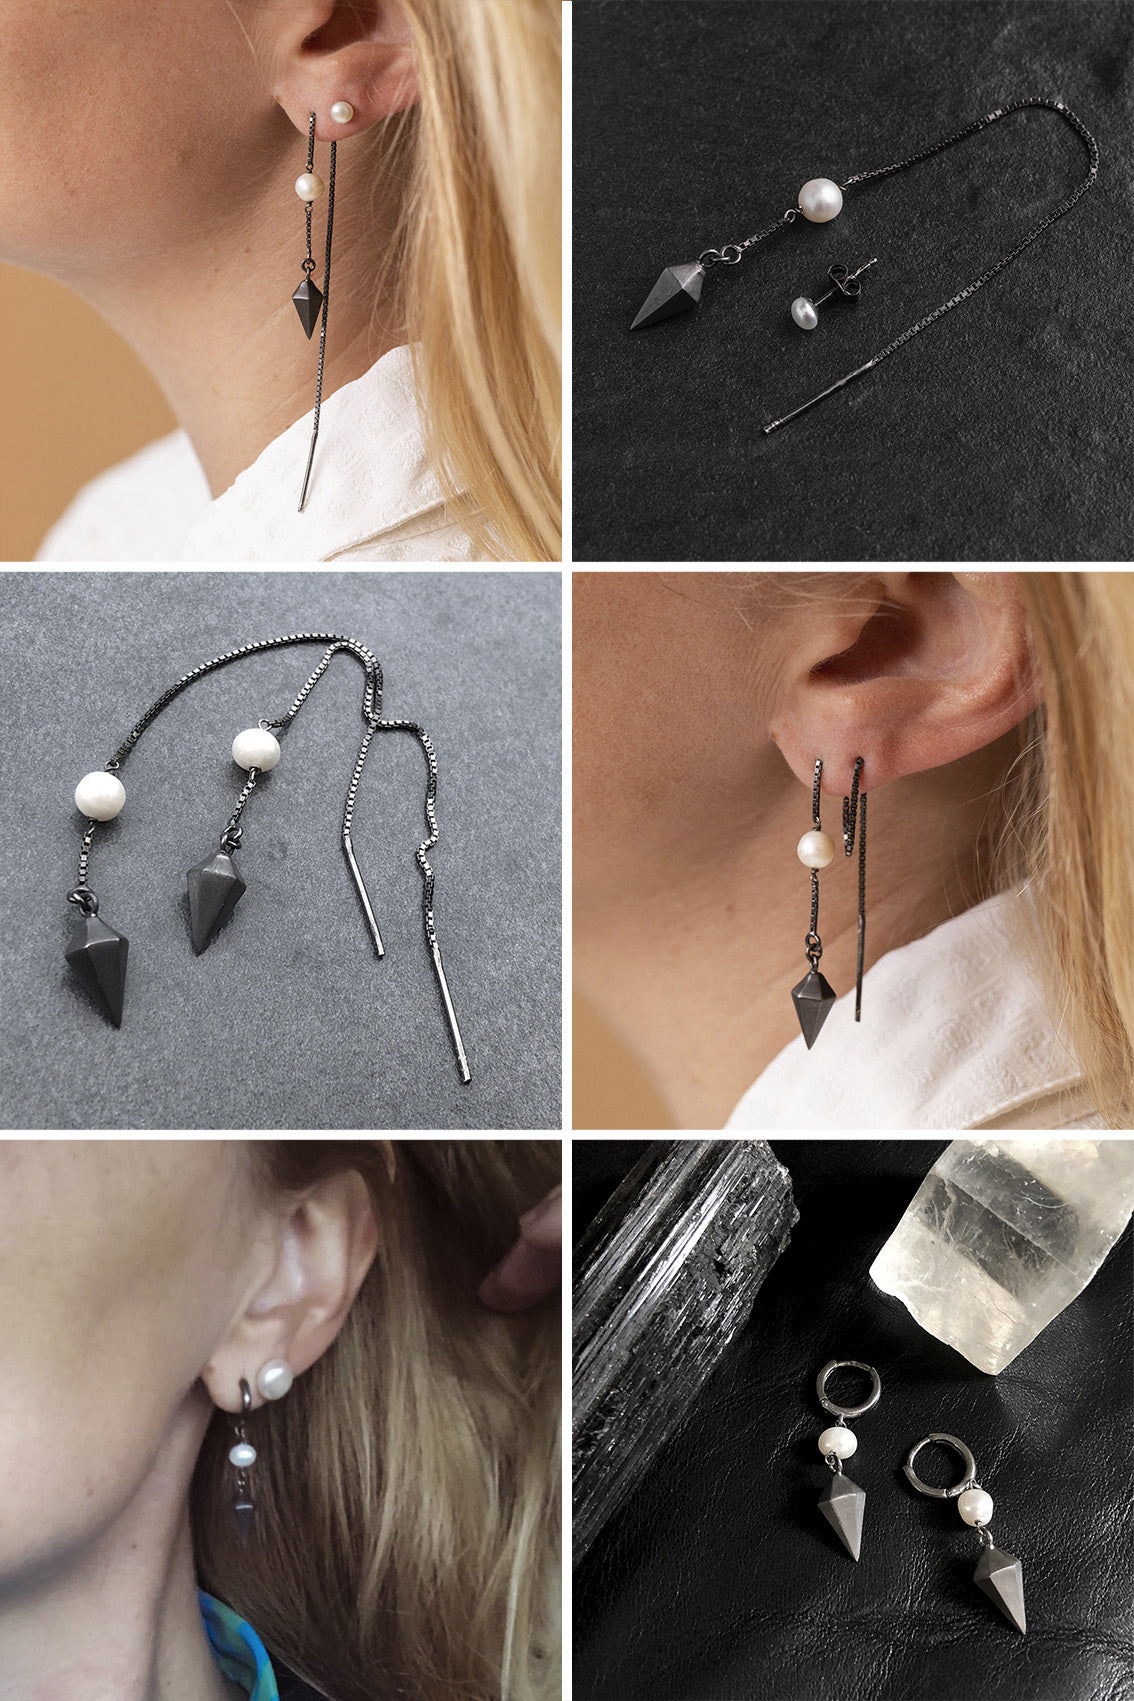 Black silver jewelry collection by hymness studio denmark. black oxidized jewelry pieces with rhodium plating